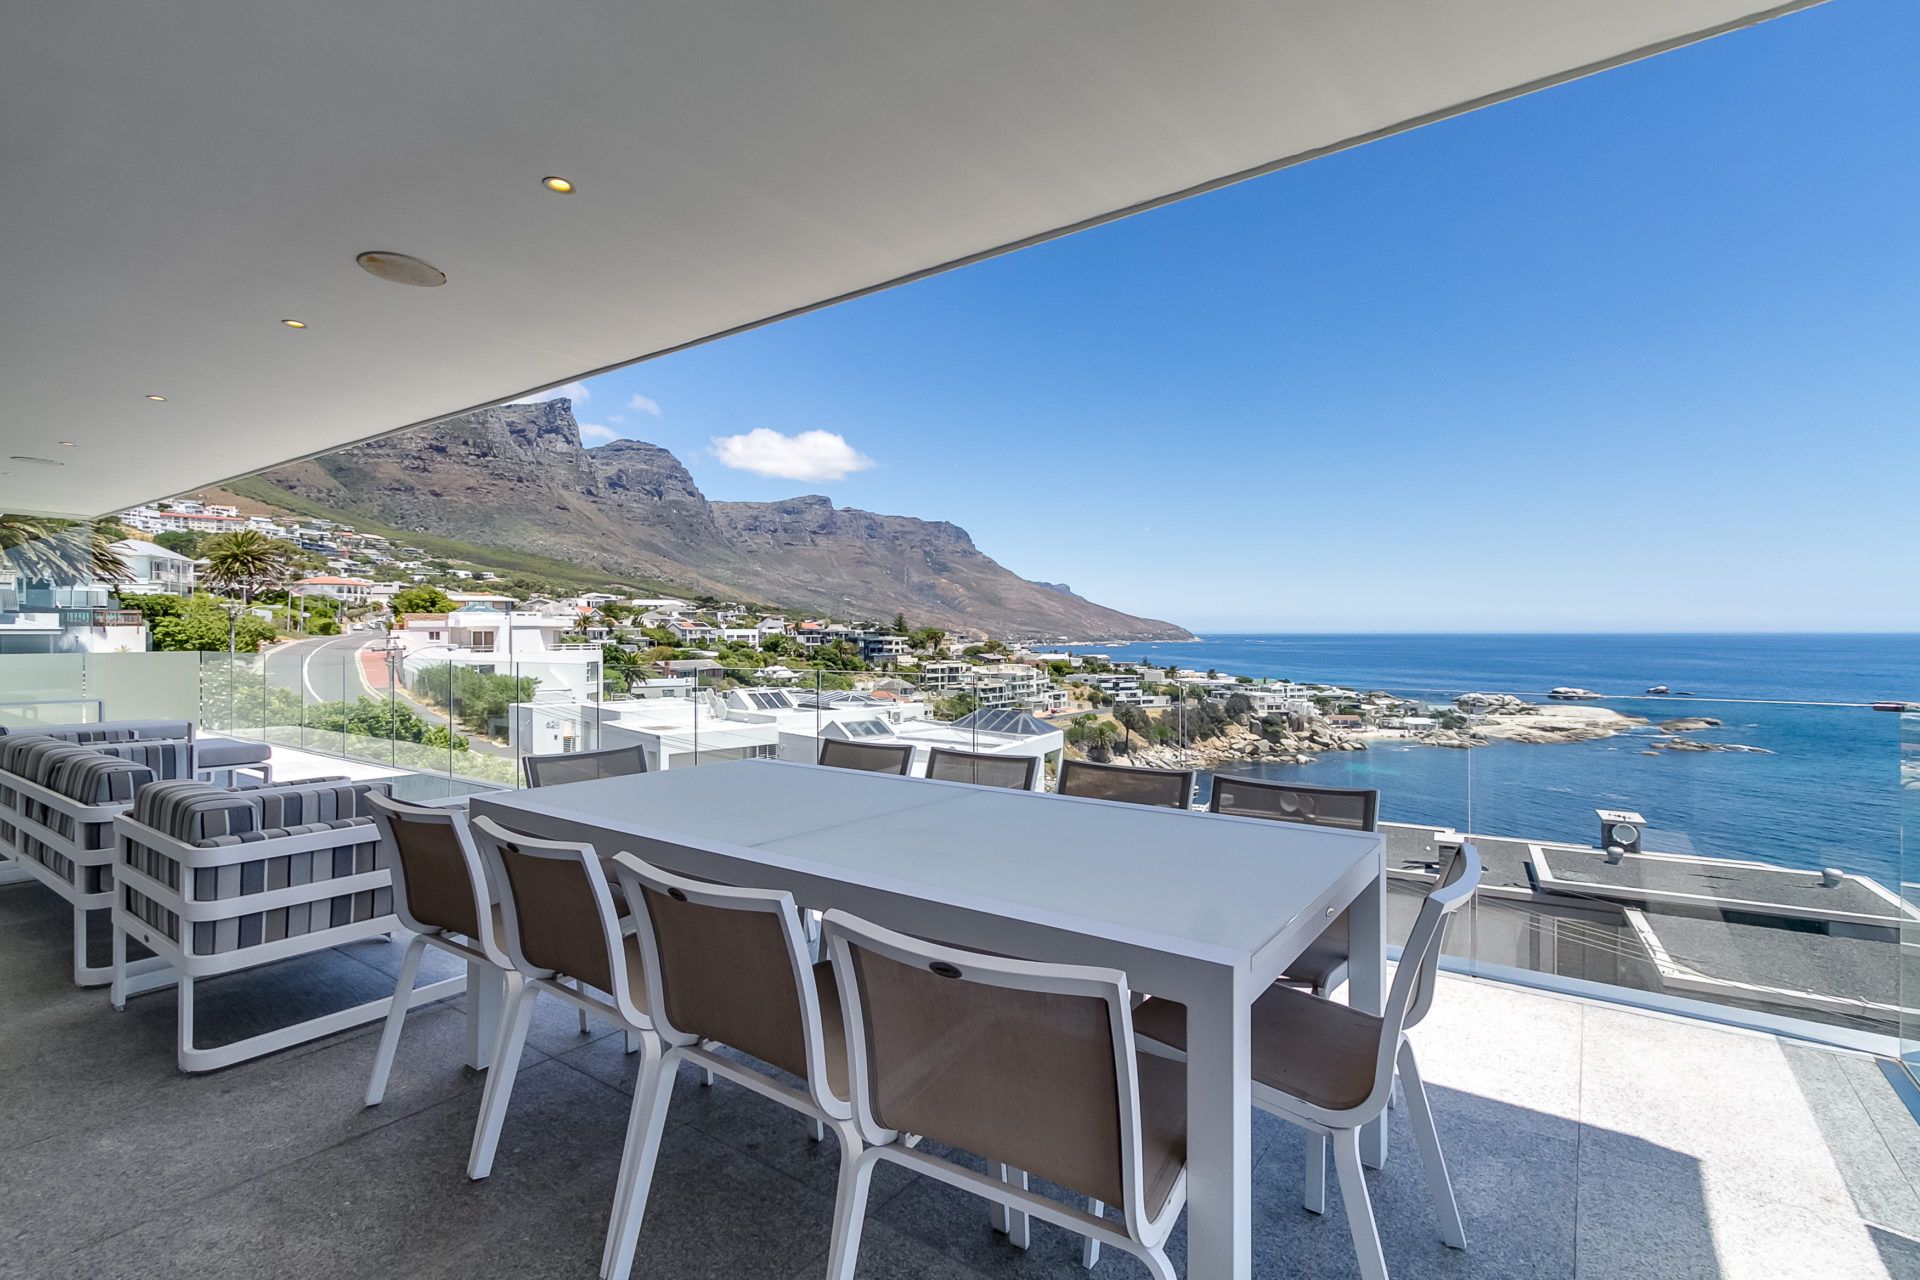 Photo 27 of Casa Camps Bay Drive accommodation in Camps Bay, Cape Town with 6 bedrooms and 6 bathrooms